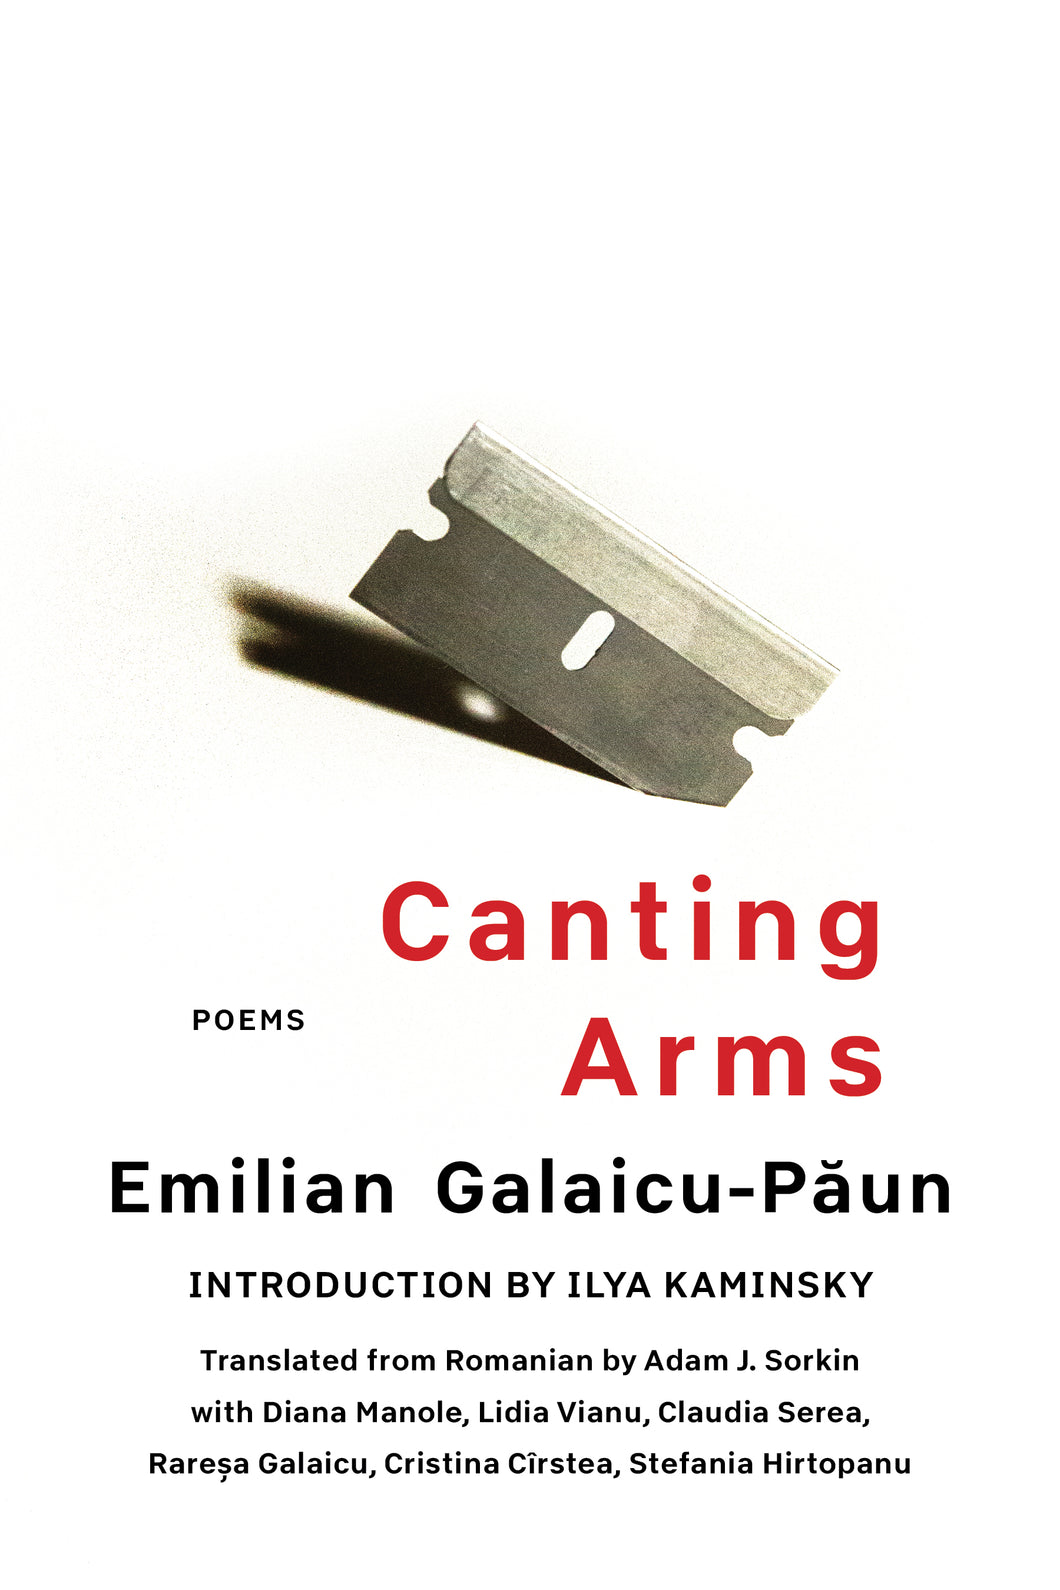 Canting Arms: Poems